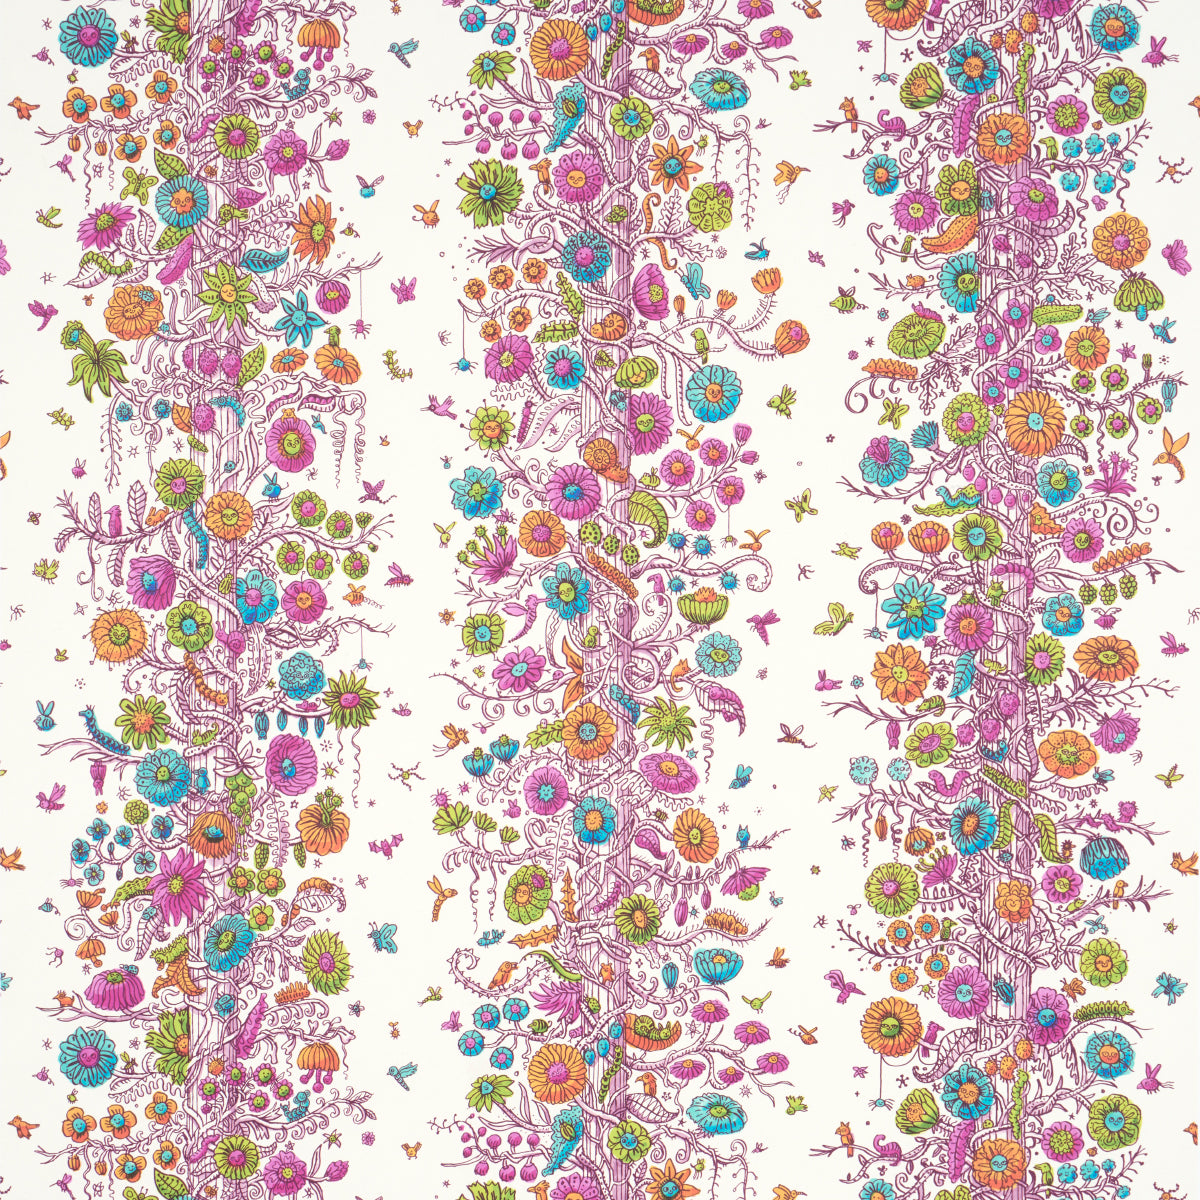 EDWARD STEED'S TOWERS OF FLOWERS | MULTICOLOR BURST